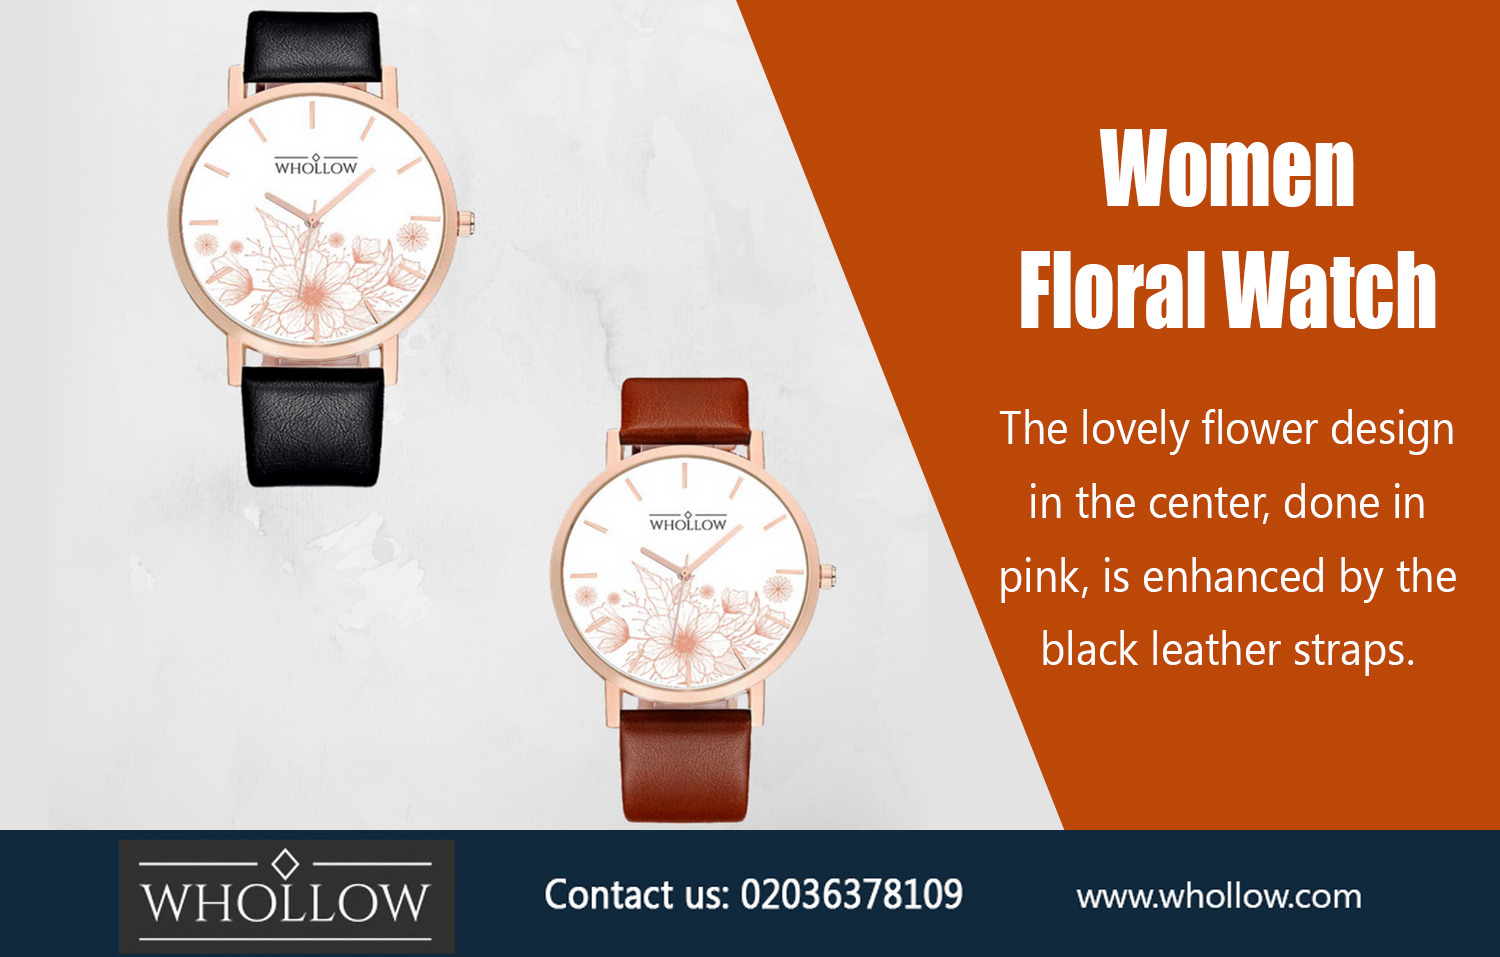 Genuine Floral Watch for Ladies|https://whollow.com